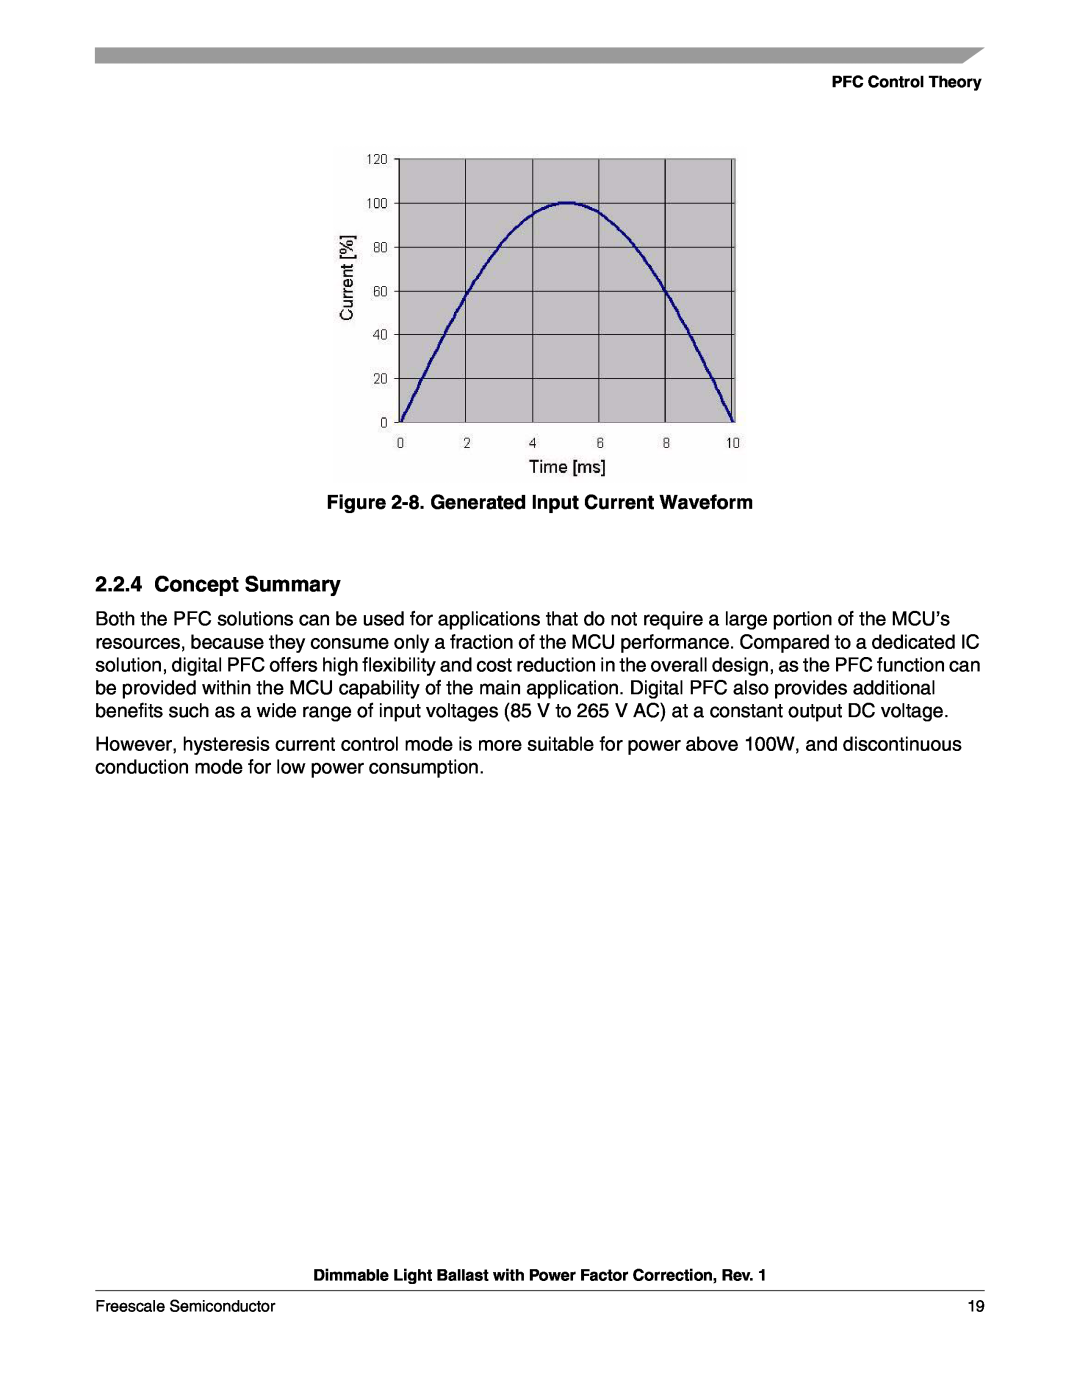 Freescale Semiconductor M68HC08 manual Concept Summary, 8.Generated Input Current Waveform 